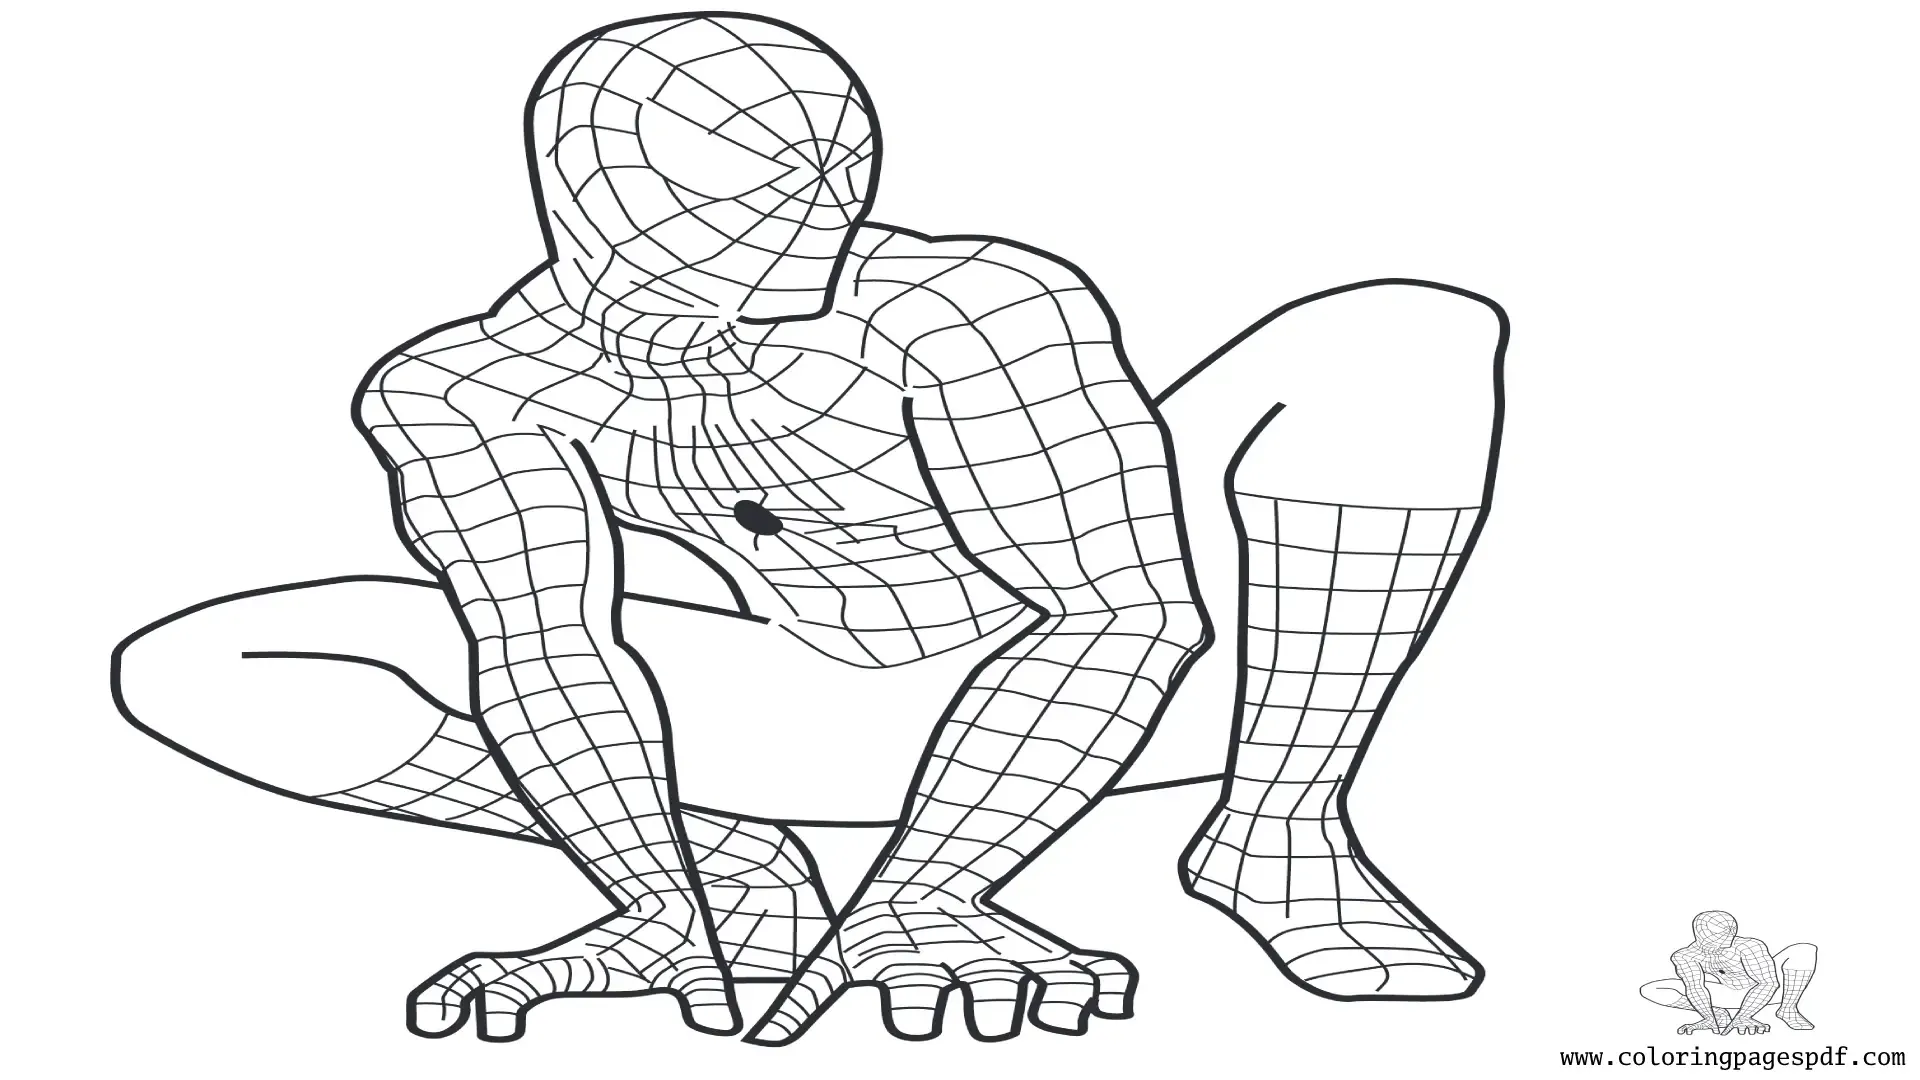 Coloring Page Of Spiderman Looking Left